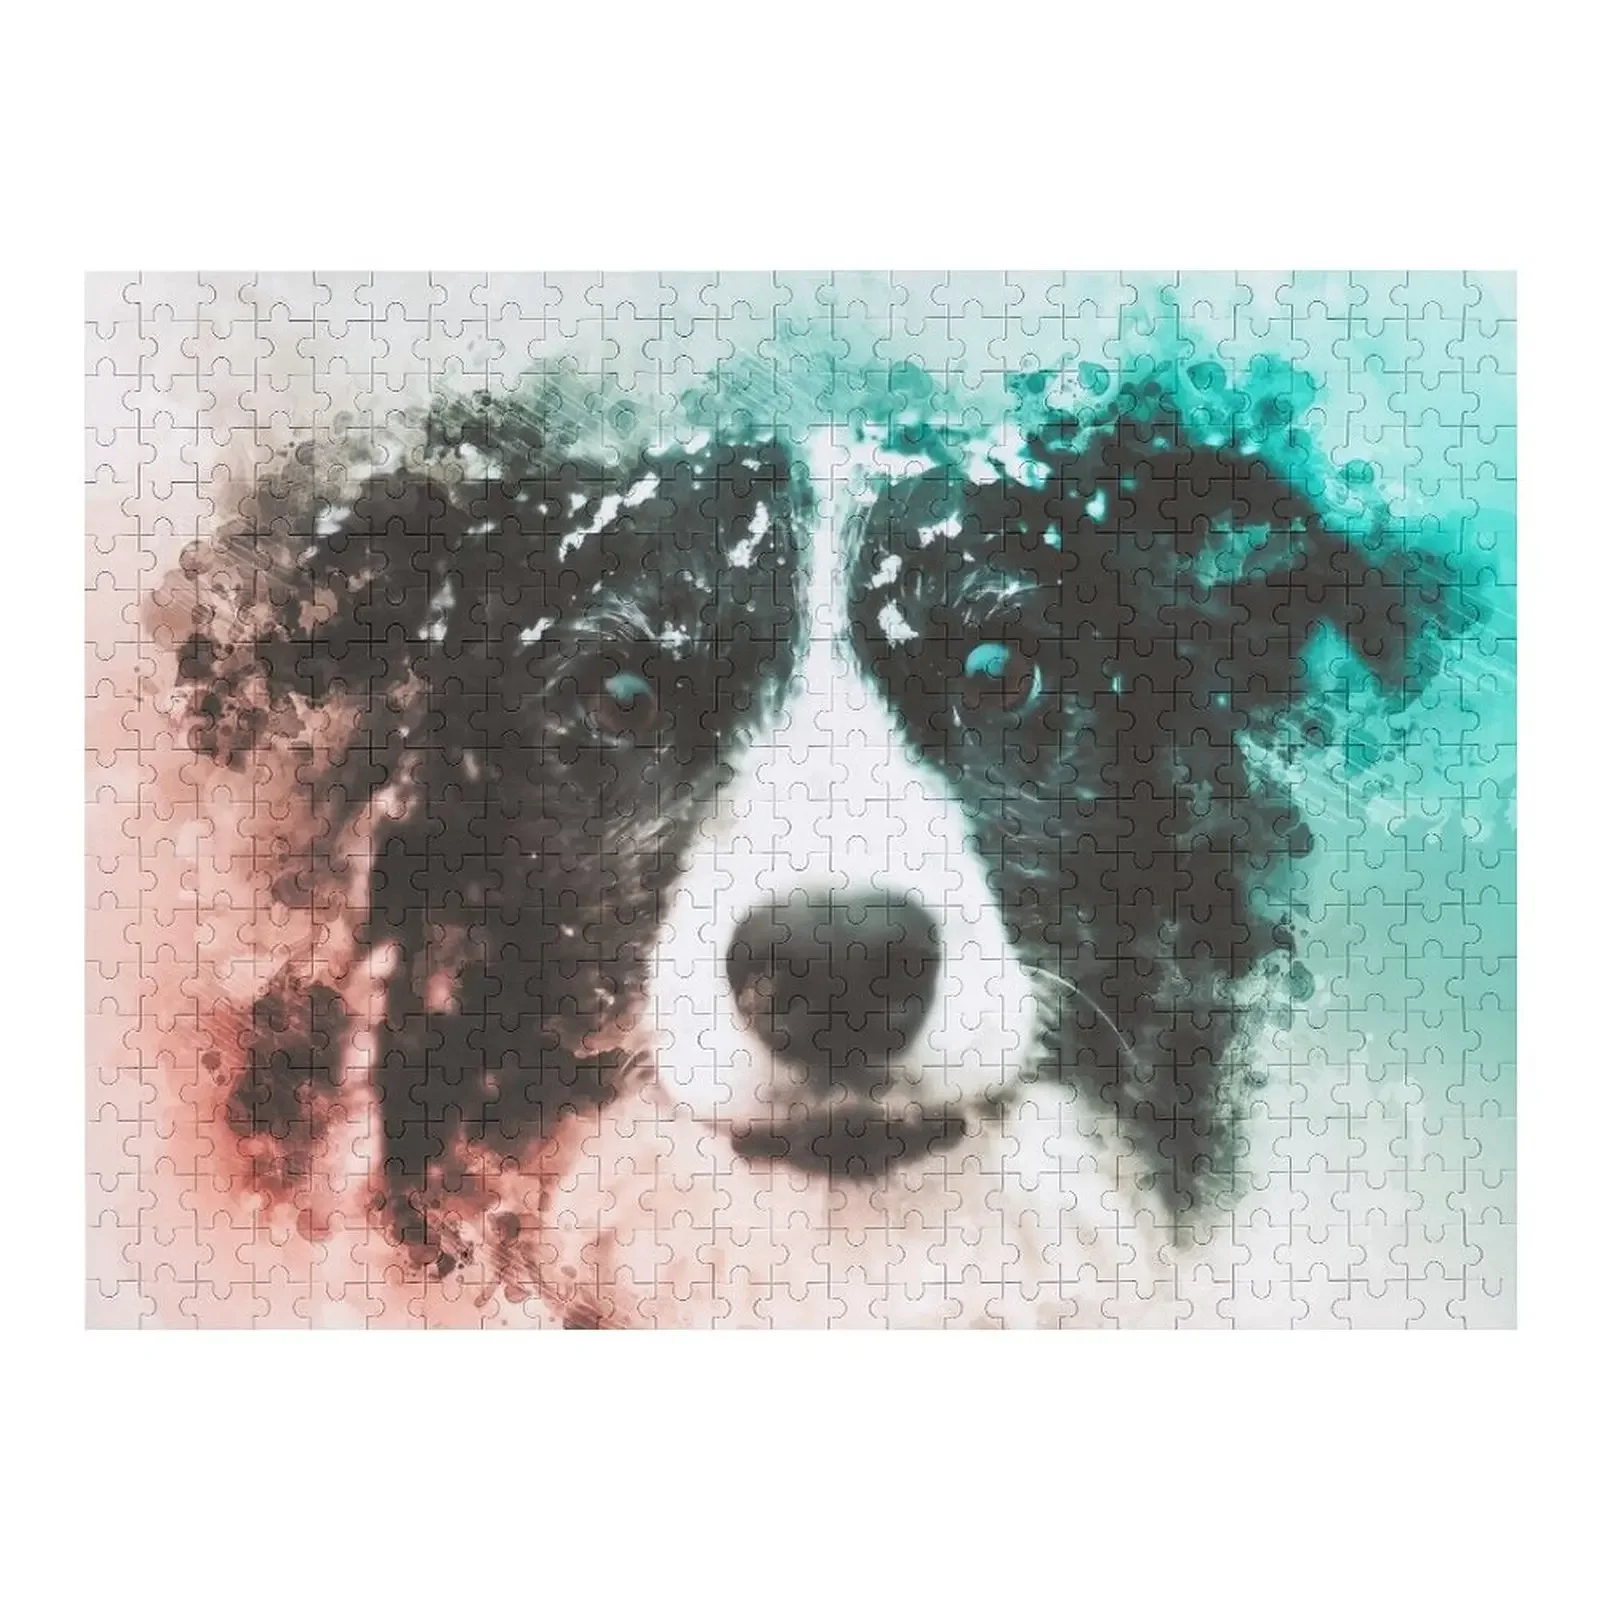 Border Collie Painting Jigsaw Puzzle Personalized Child Gift Customized Gifts For Kids Puzzle border collie luggage tag pet dog gift suitcase baggage privacy cover id label